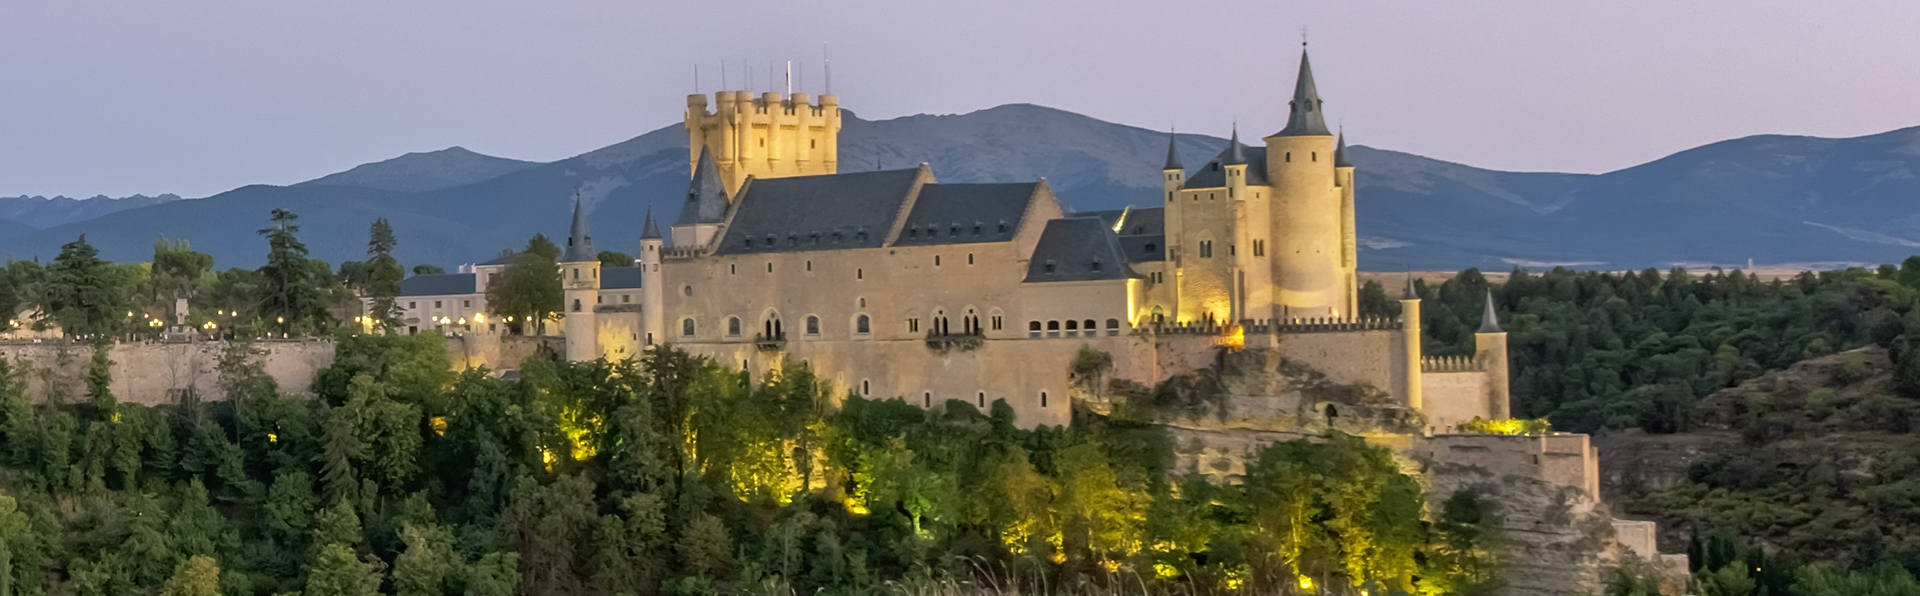 The Alcazar (fortified castle)